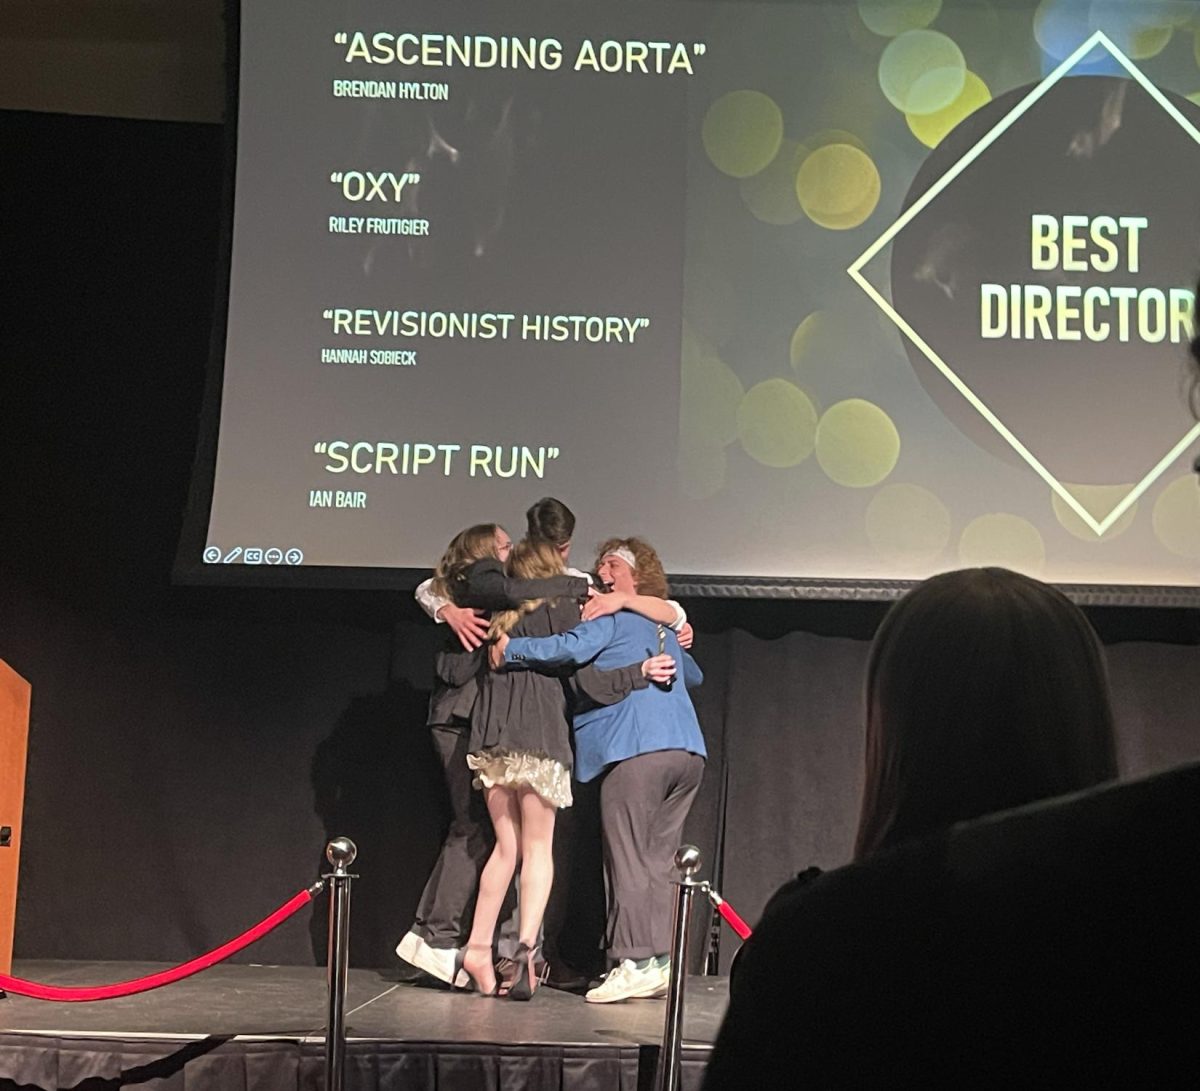 Best Director winner Hannah Sobieck and her crew Riley Frutiger, Ian Bair, Holt Hendershot, and Andres Johnson celebrate with a group hug after receiving their award